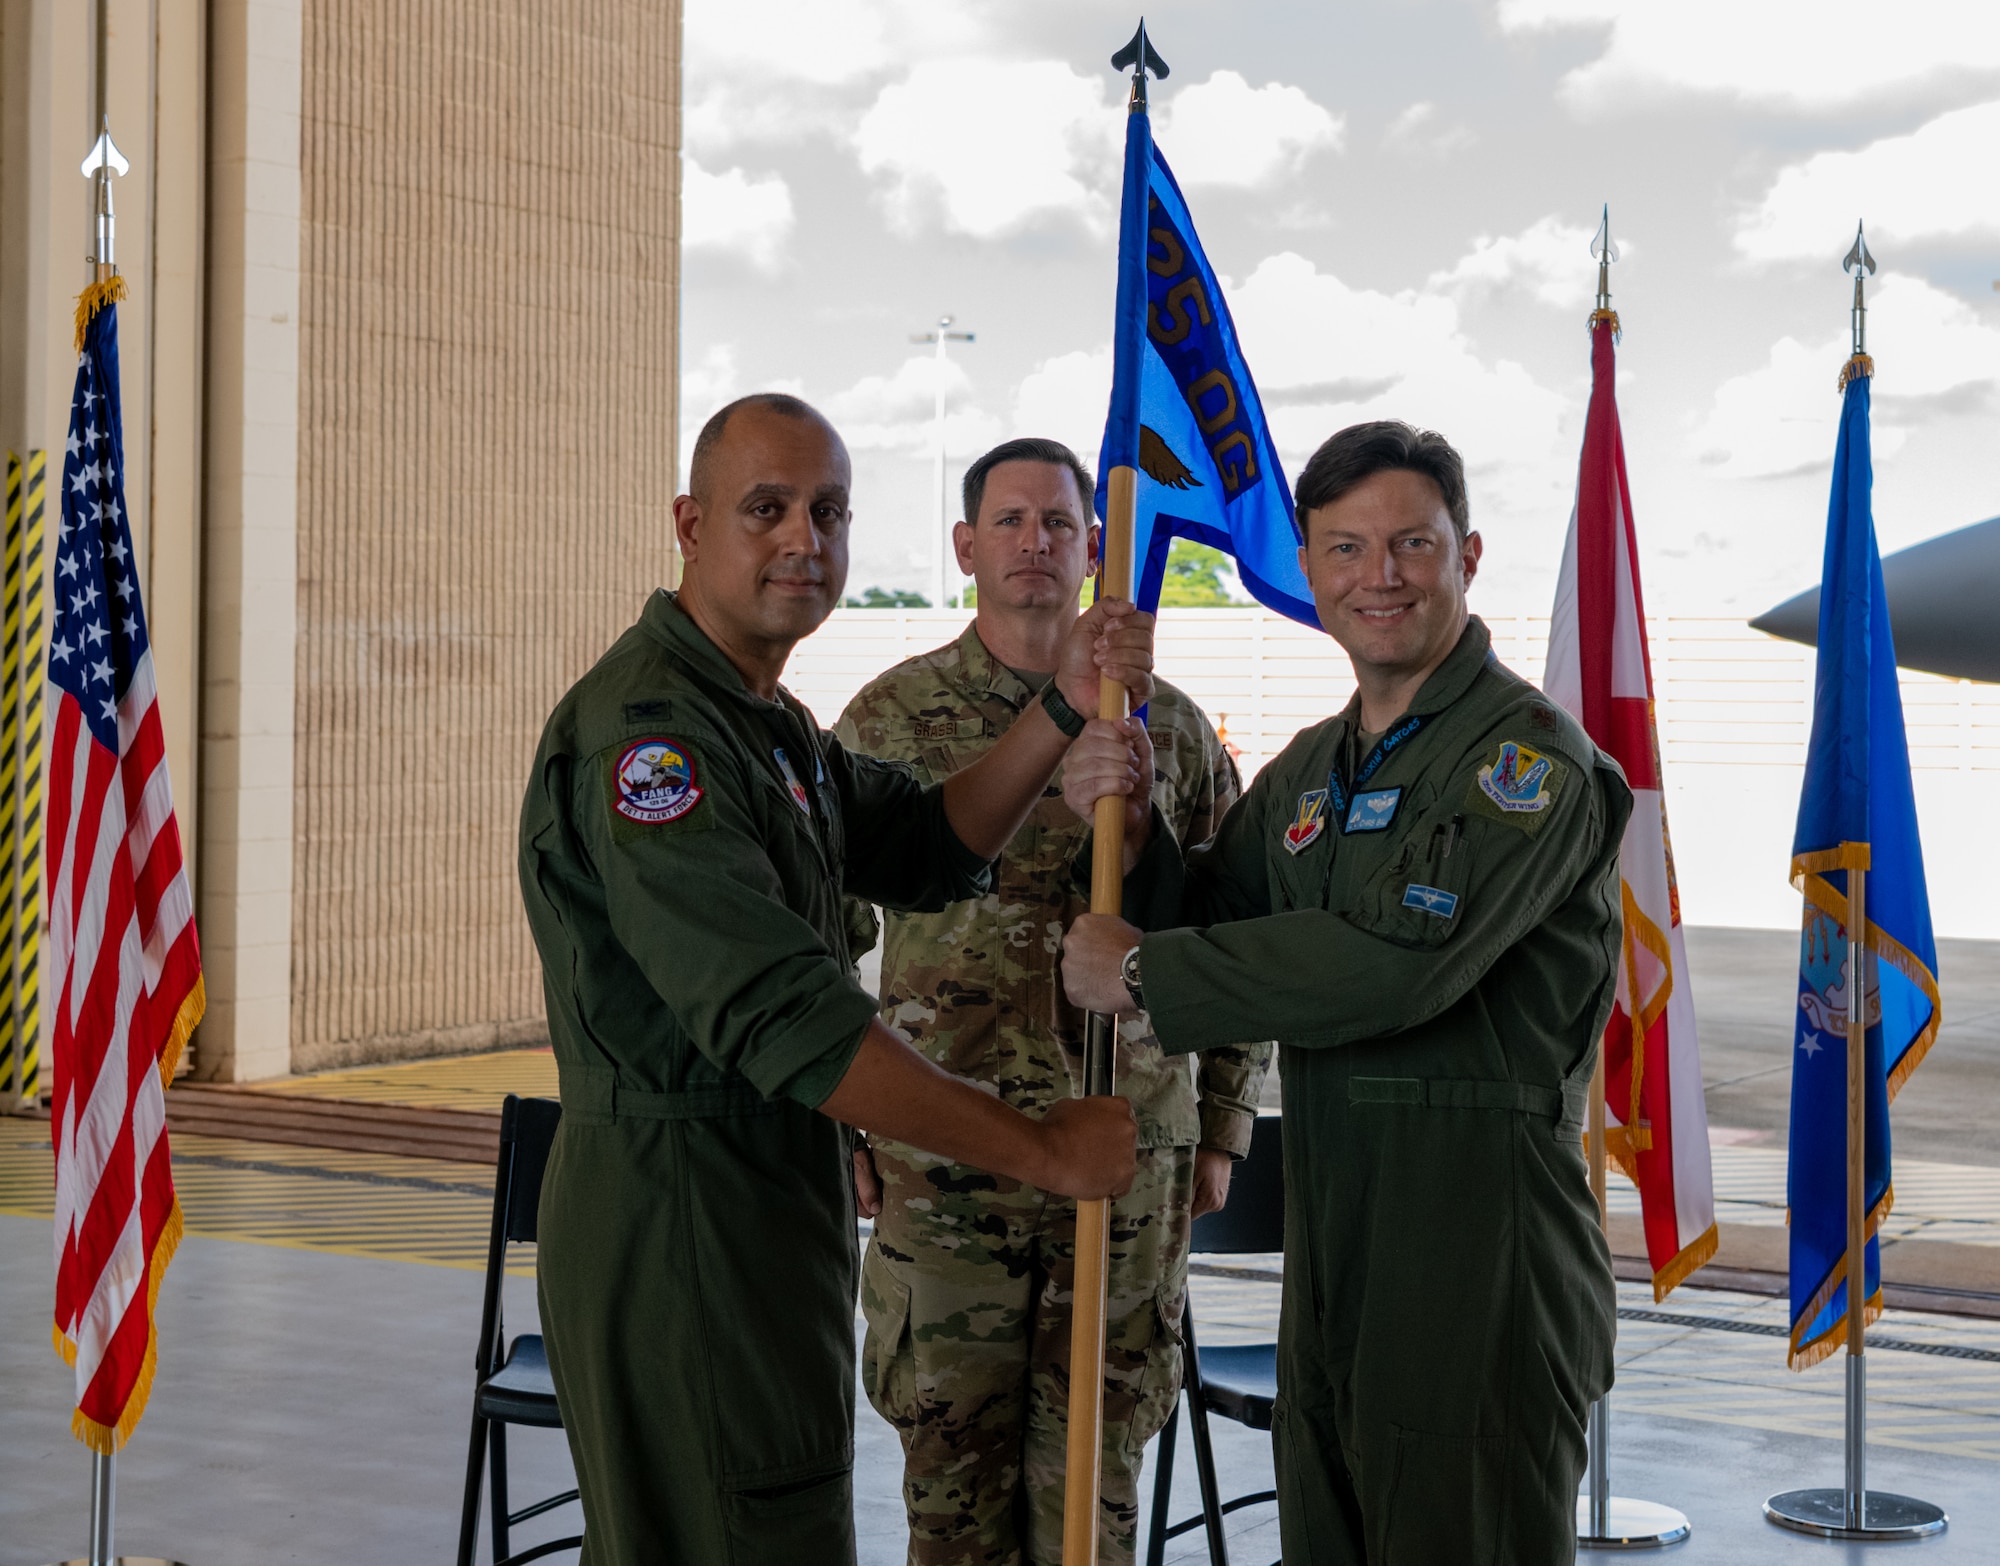 Col. Mansour G. Elhihi, left, 125th Fighter Wing Operation Group commander gives the unit guidon to Maj. Christopher Bell, Detachment 1, 125th FW commander during an assumption of command ceremony at Homestead Air Reserve base, Fla., on Oct. 15, 2021. (U.S. Air Force photo by Tech. Sgt. Allissa Landgraff)